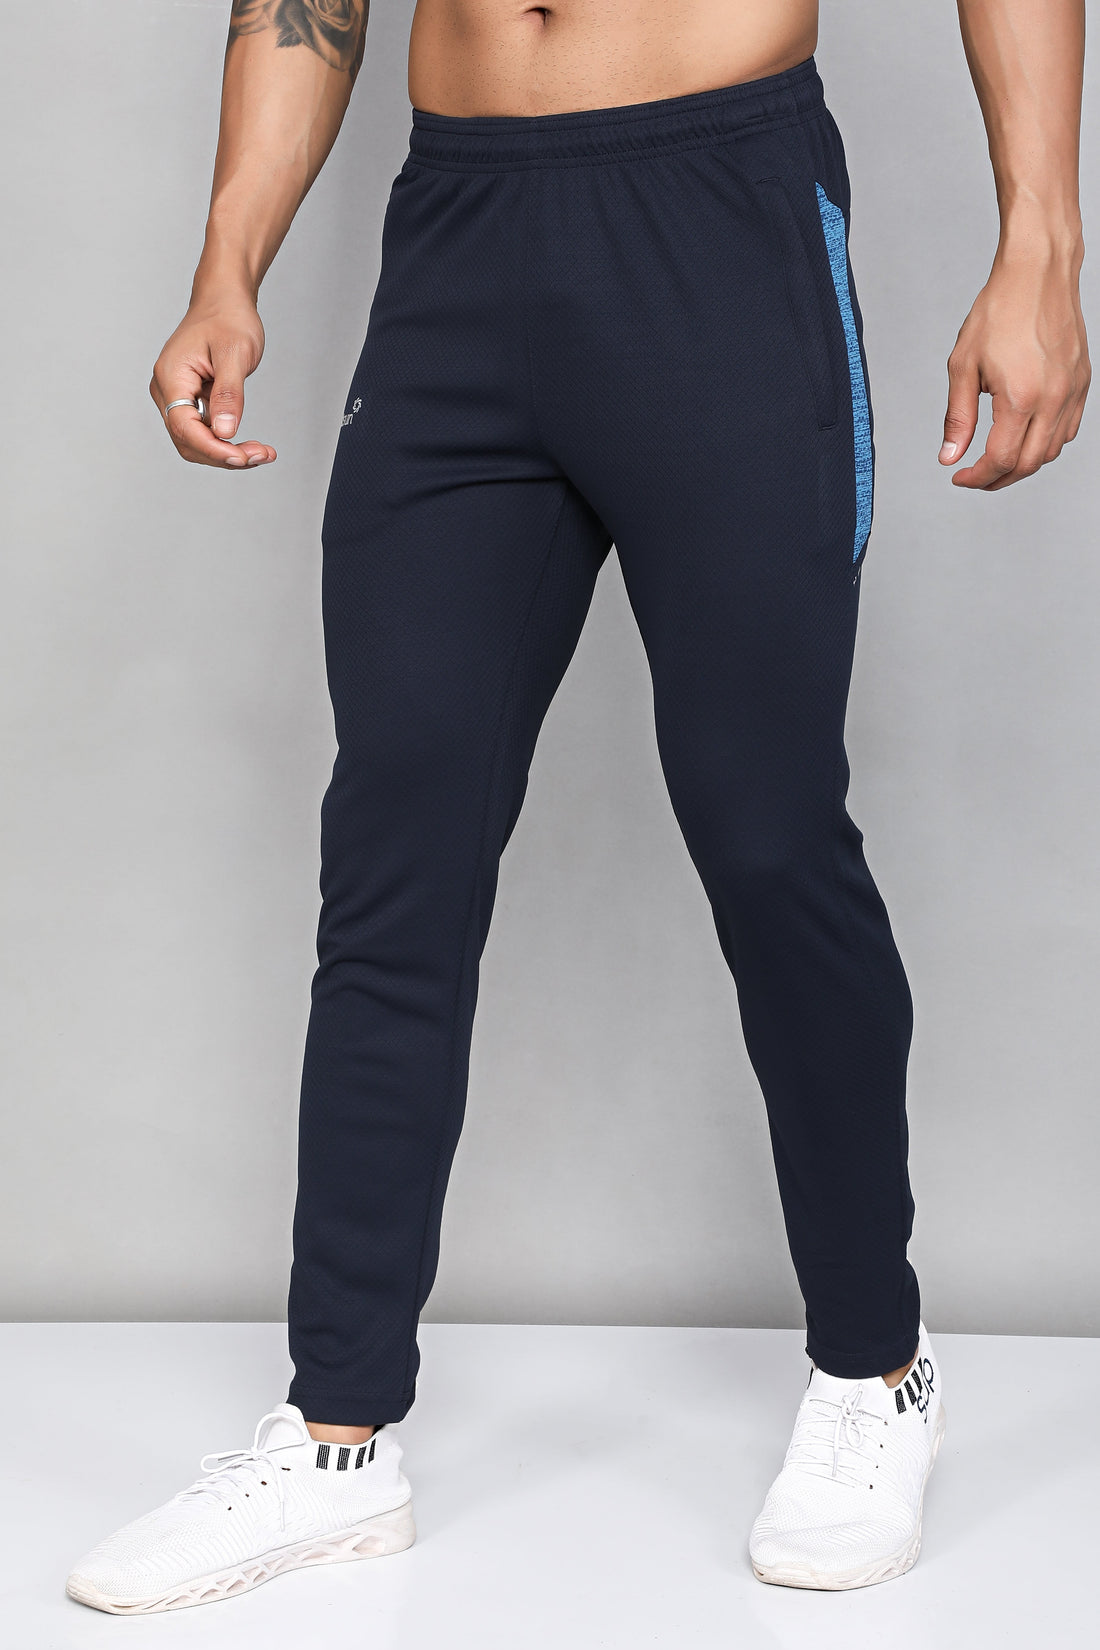 Mens Skinny Fitness Sweatpants Casual Sportswear For Hip Hop Streetwear,  Autumn Joggers And Track Sports Trousers For Men From Zanzibar, $23.78 |  DHgate.Com